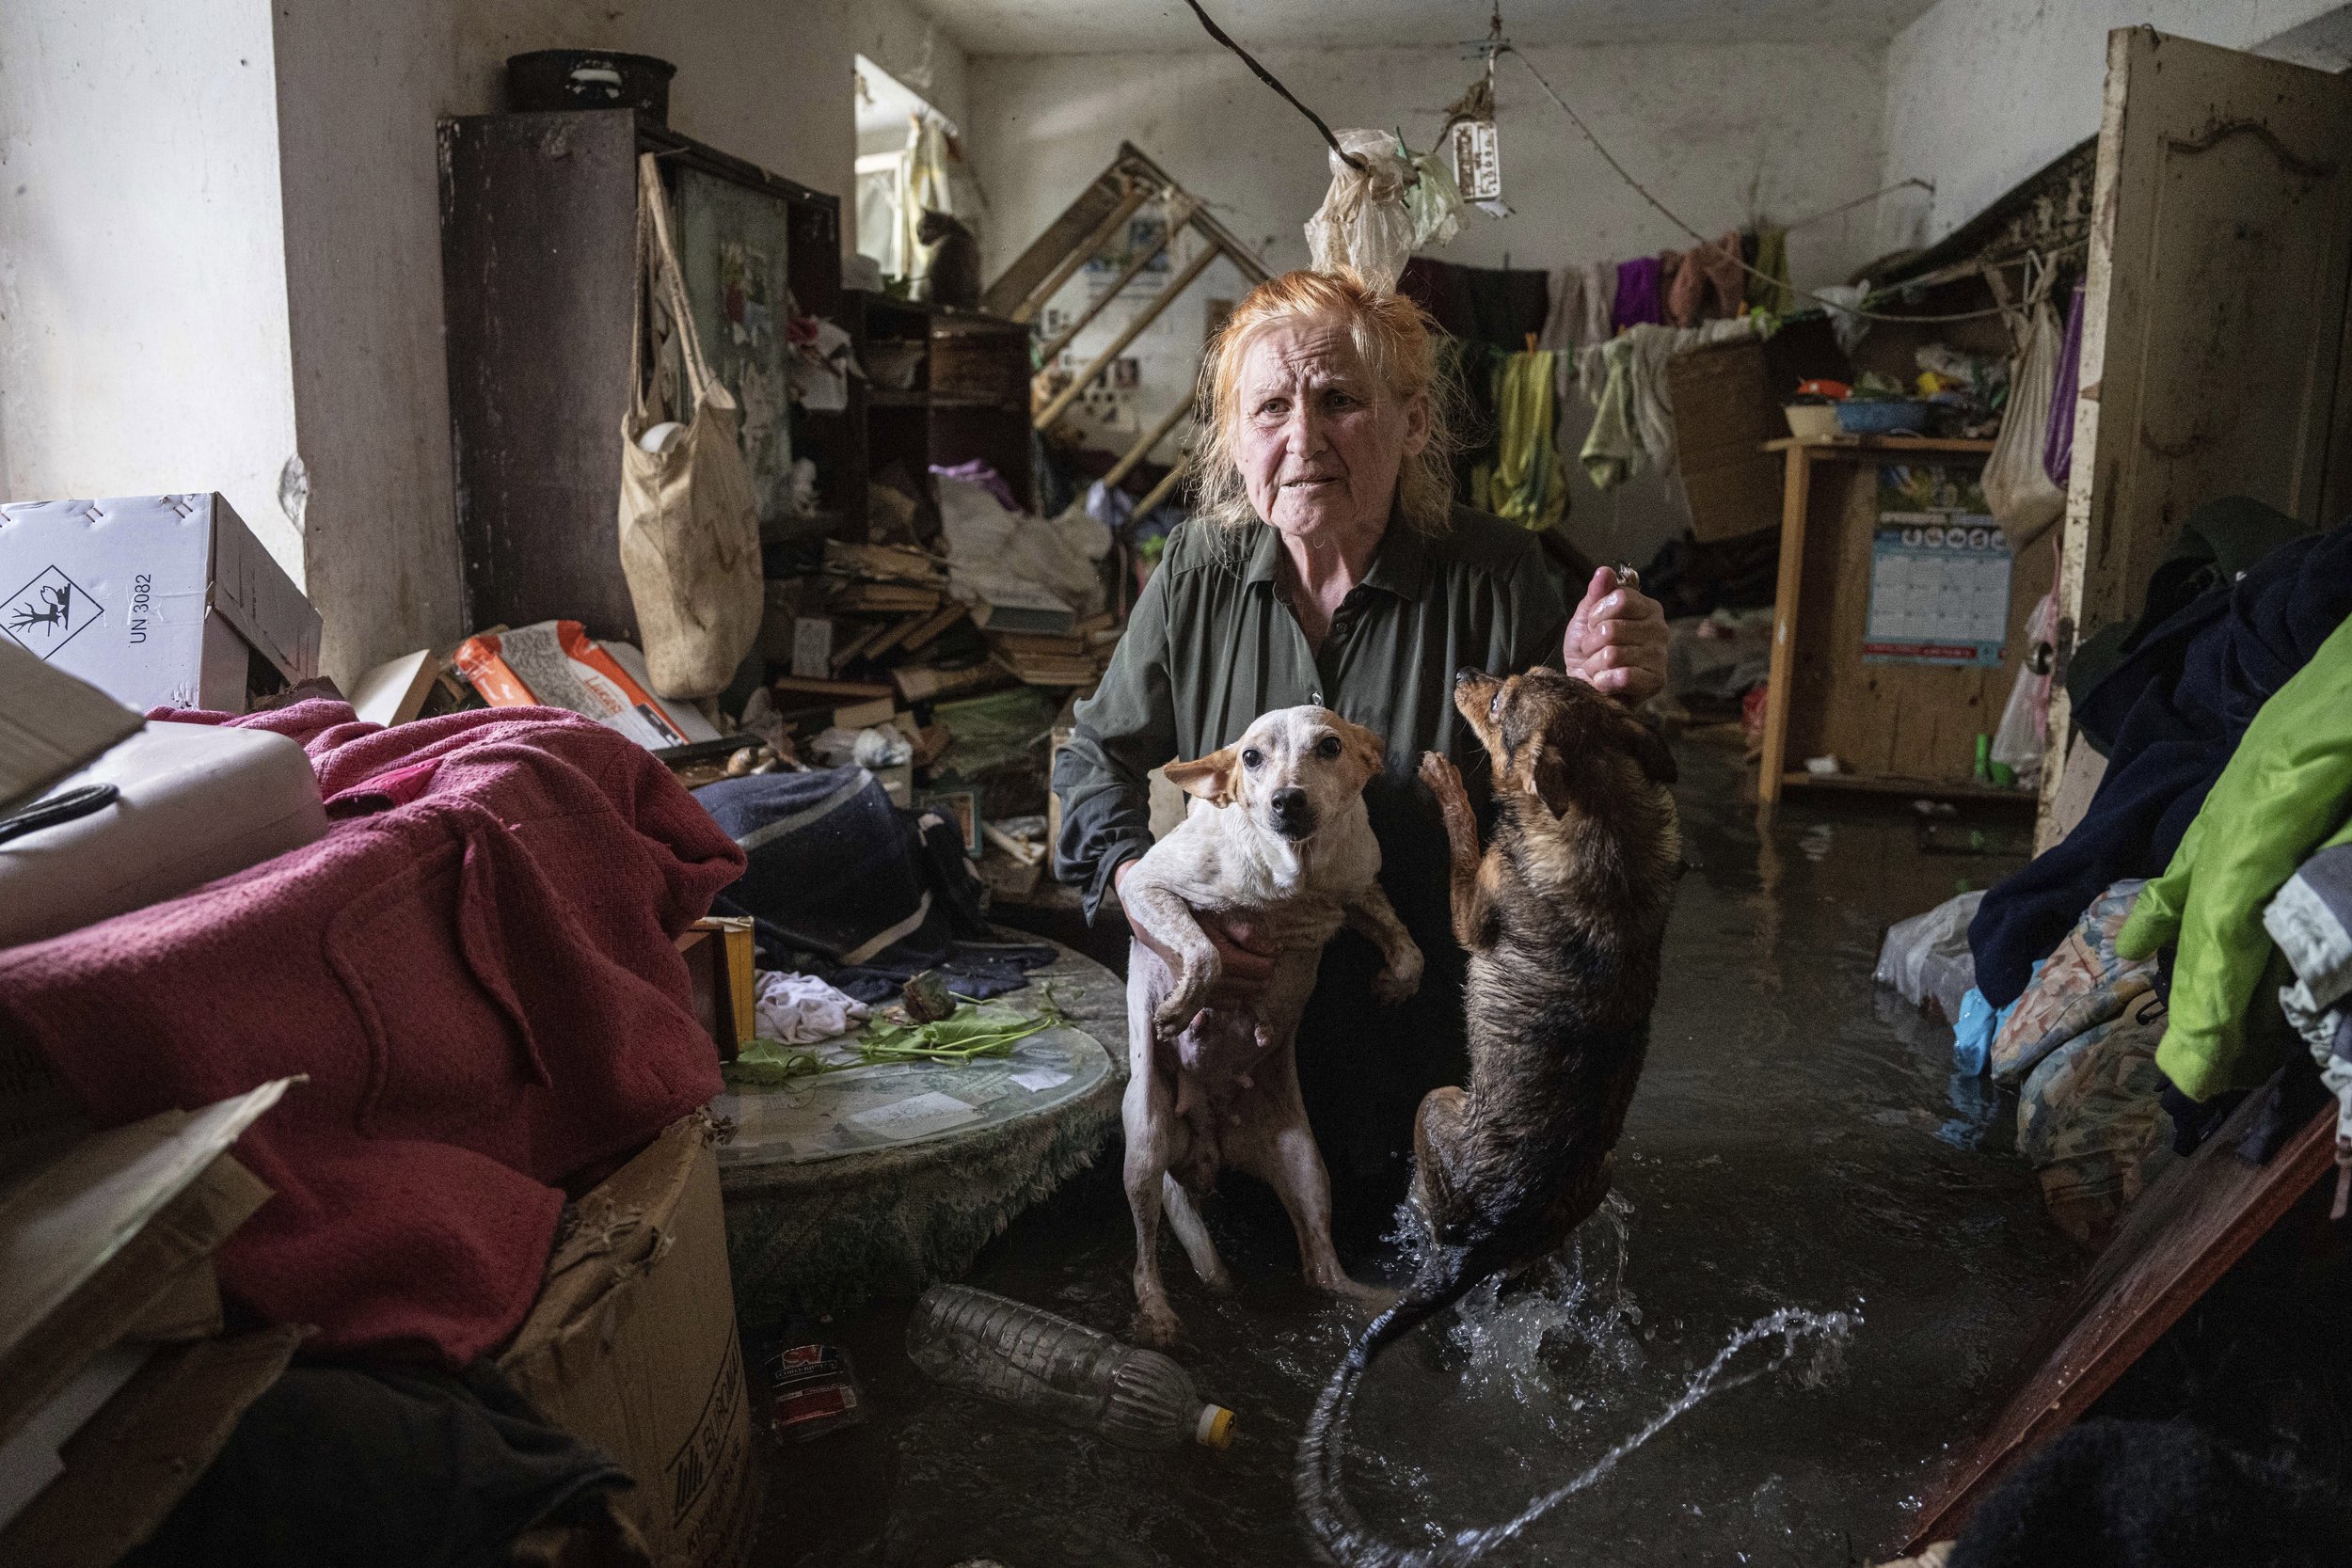  Tetiana holds her pet dogs, Tsatsa and Chunya, in her home that was flooded after the Kakhovka dam blew up overnight, in Kherson, Ukraine, on June 6, 2023. Ukraine accused Russian forces of blowing up the dam and hydroelectric power station, located